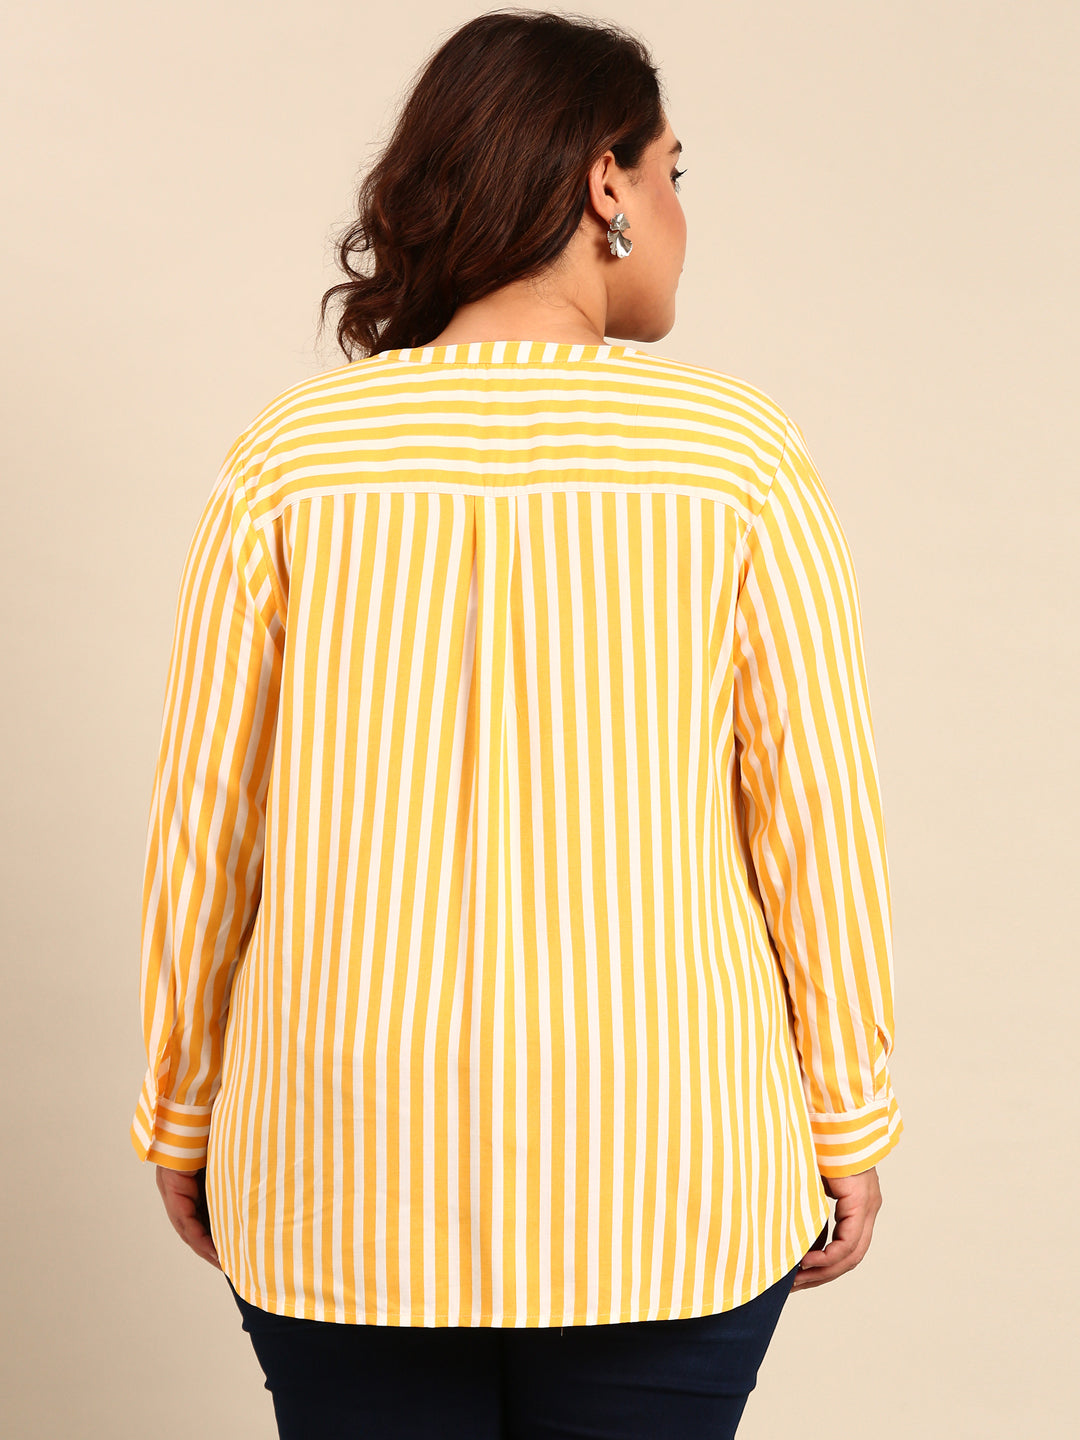 YELLOW STRIPED TOP